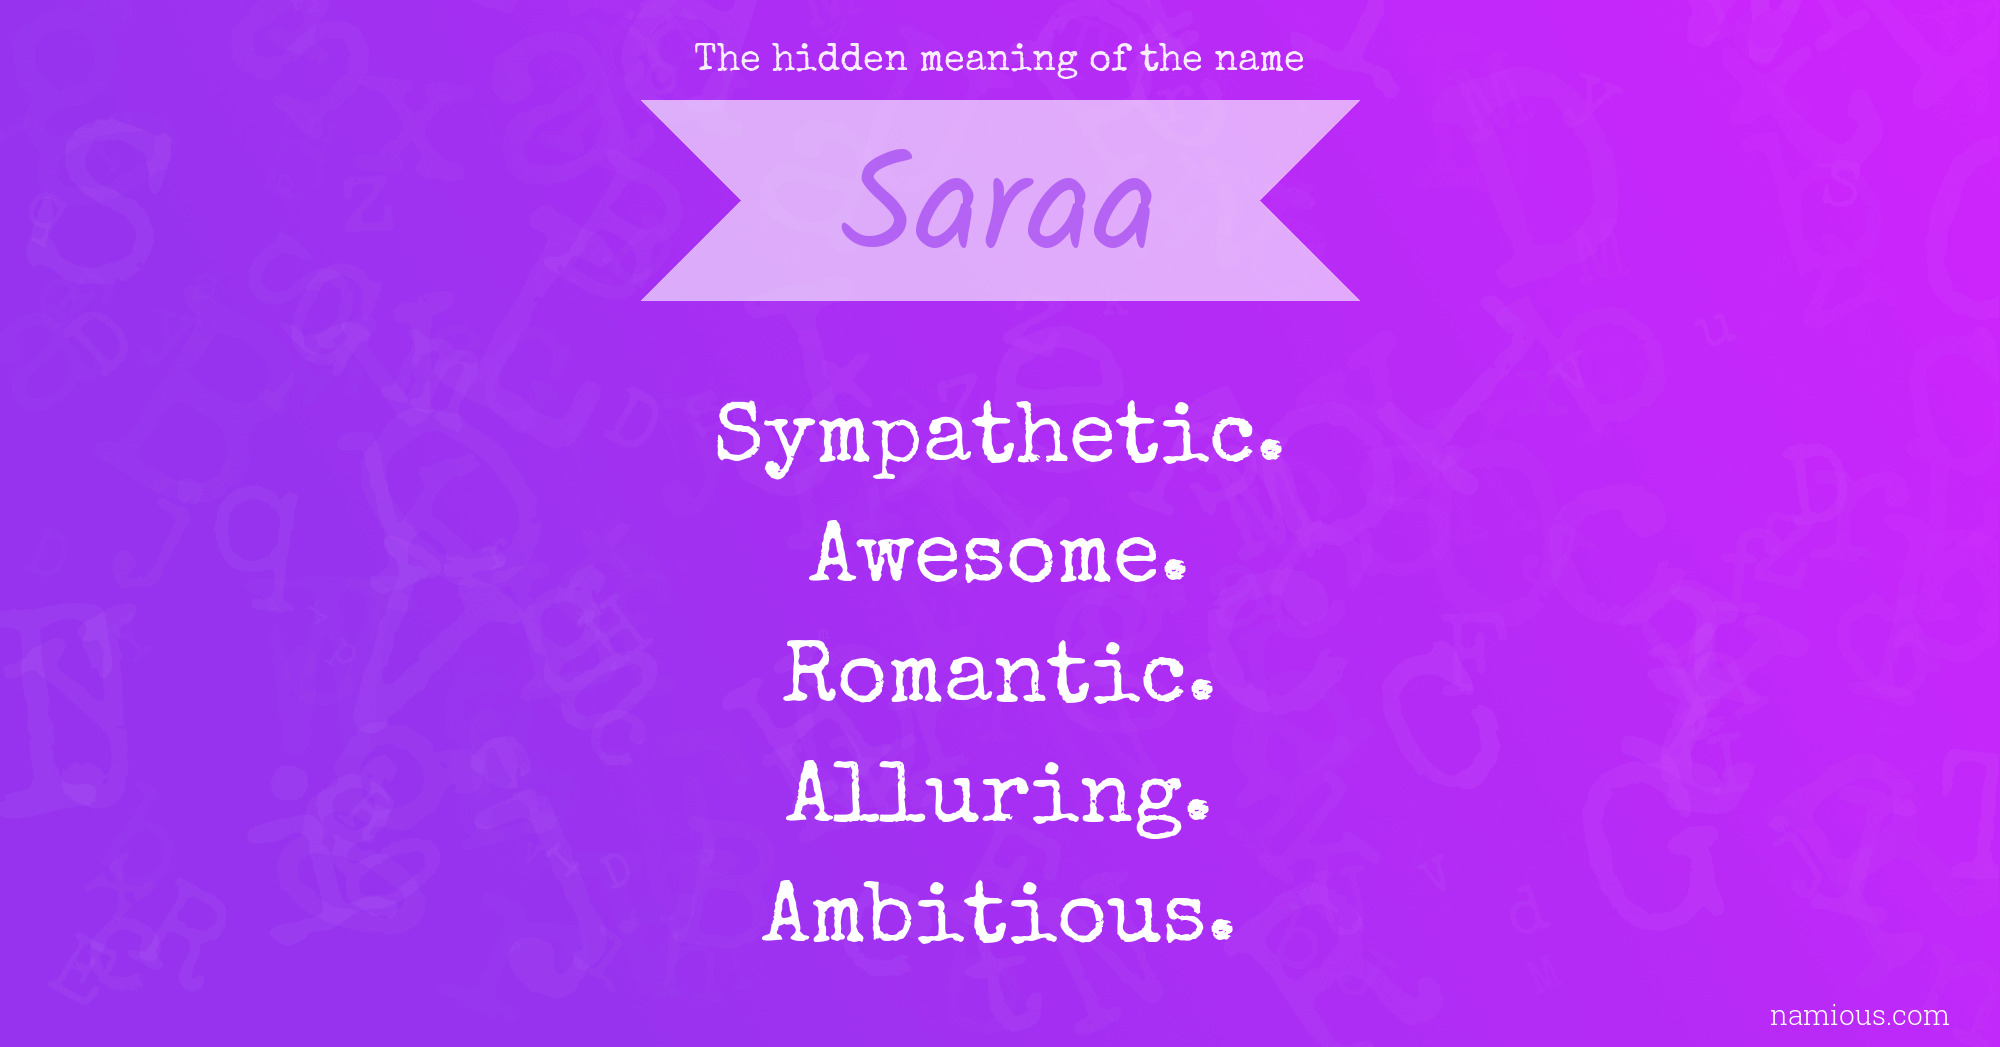 The hidden meaning of the name Saraa